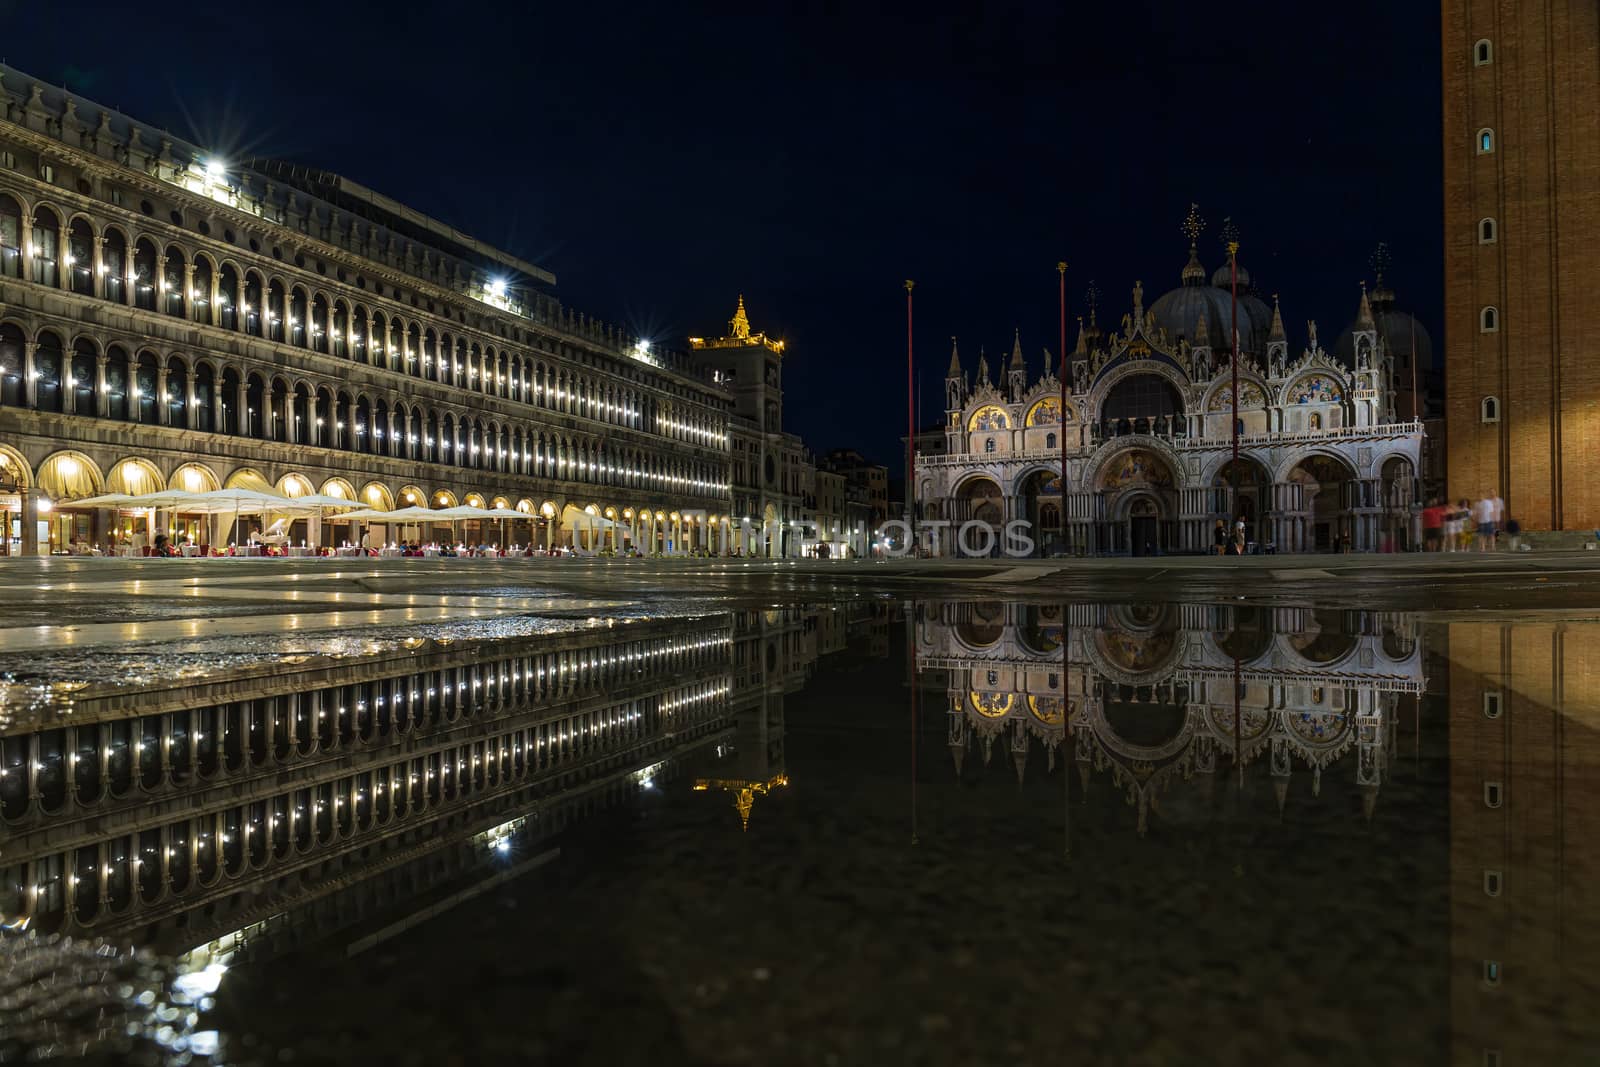 Piazza San Marco at night, Venice, Italy by COffe